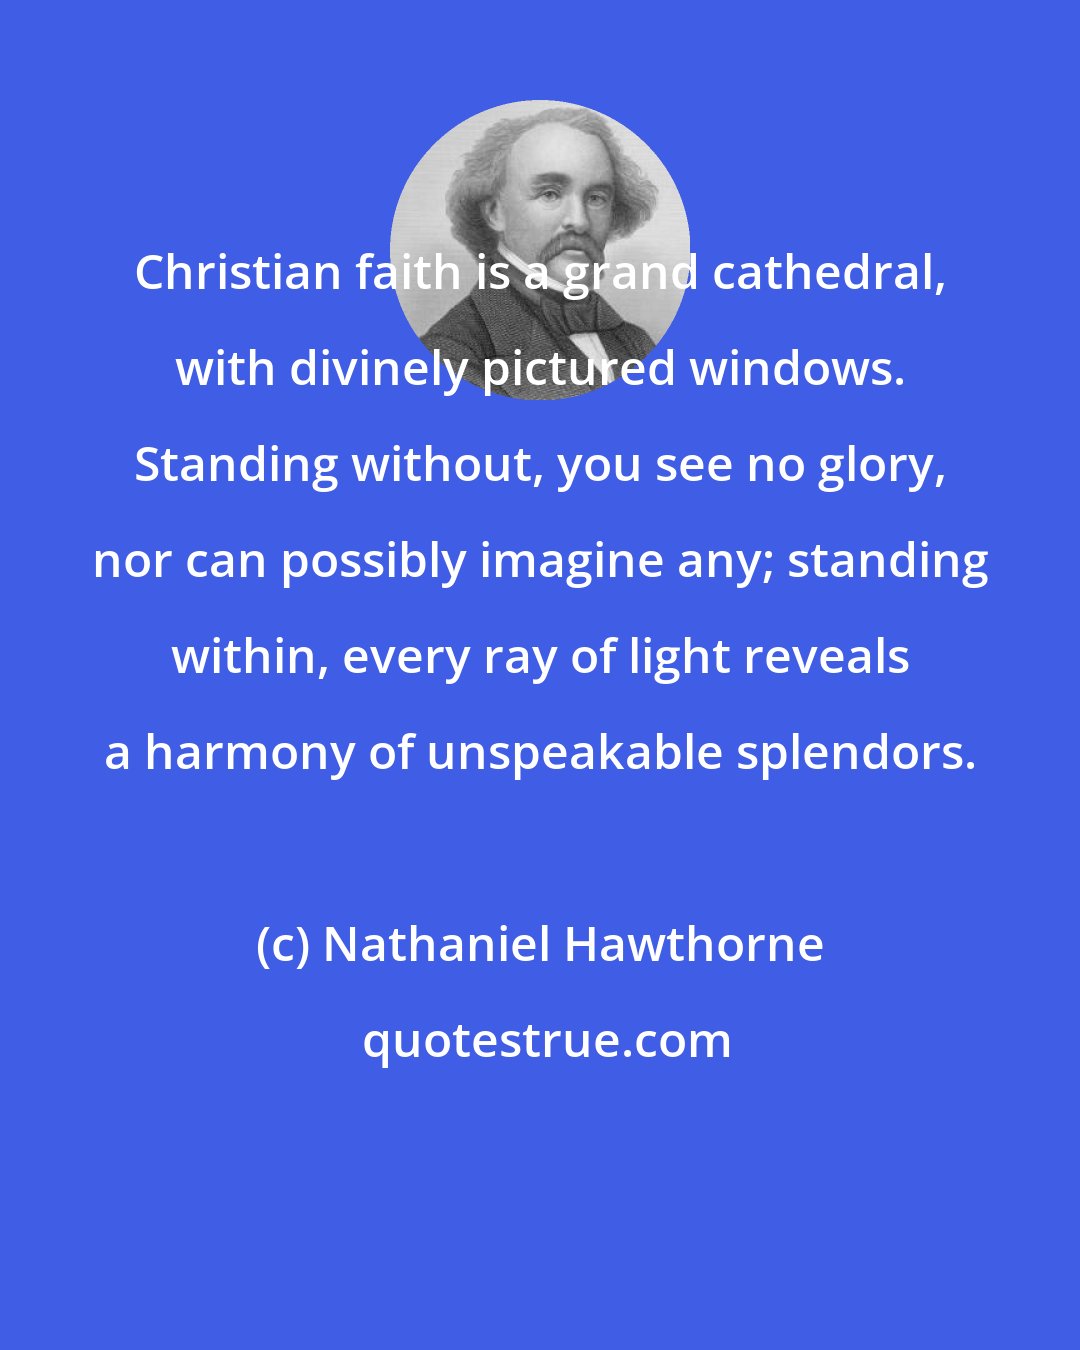 Nathaniel Hawthorne: Christian faith is a grand cathedral, with divinely pictured windows. Standing without, you see no glory, nor can possibly imagine any; standing within, every ray of light reveals a harmony of unspeakable splendors.